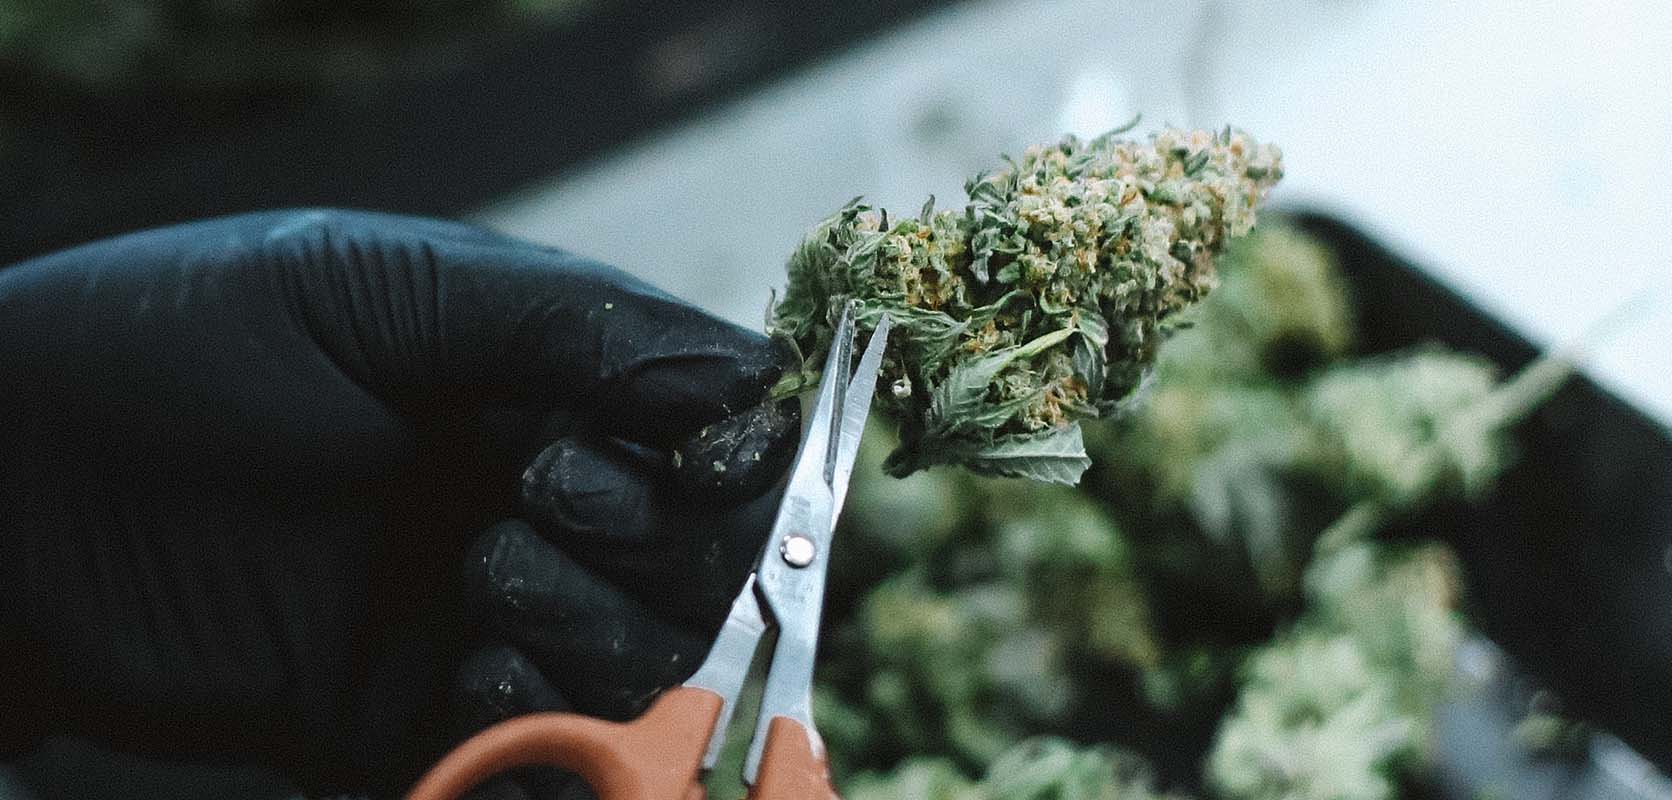 Trimming cannabis professionally. order weed online. rainbow kush, tom ford strain, and hindu kush strain weed online canada west coast supply. 